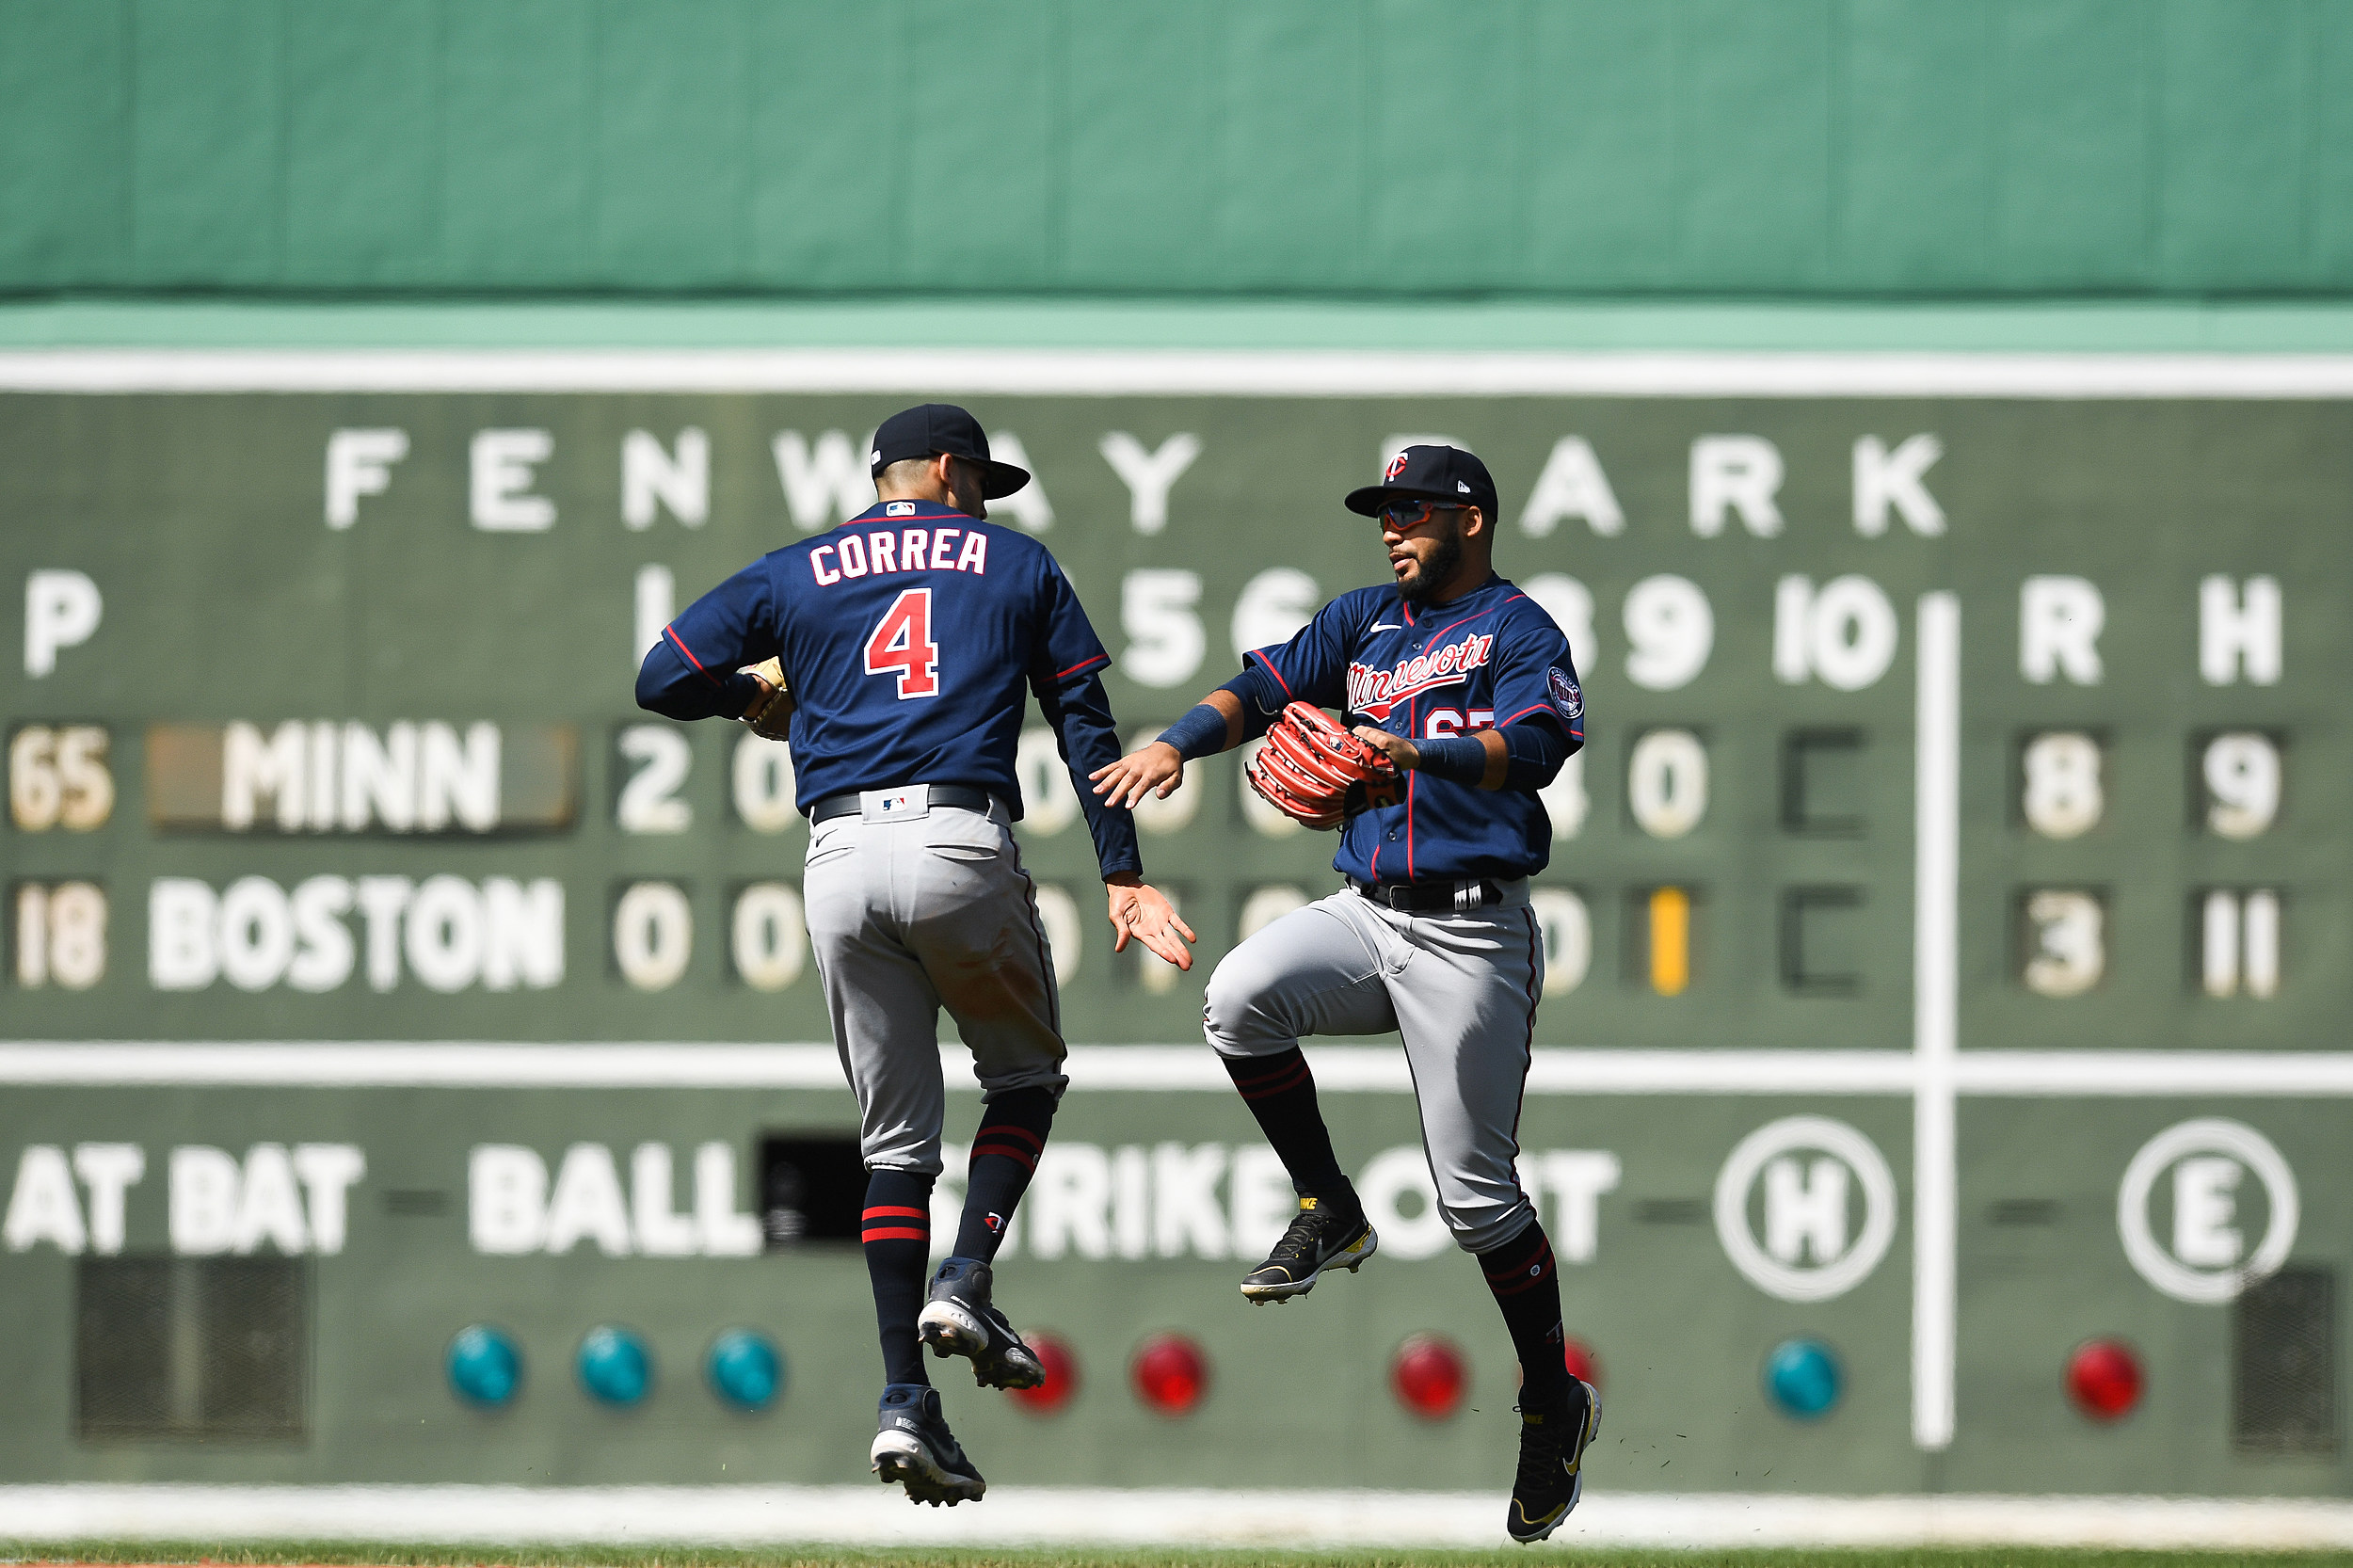 Polanco HR, 4 RBIs; Twins beat Red Sox 8-3 on Patriots' Day